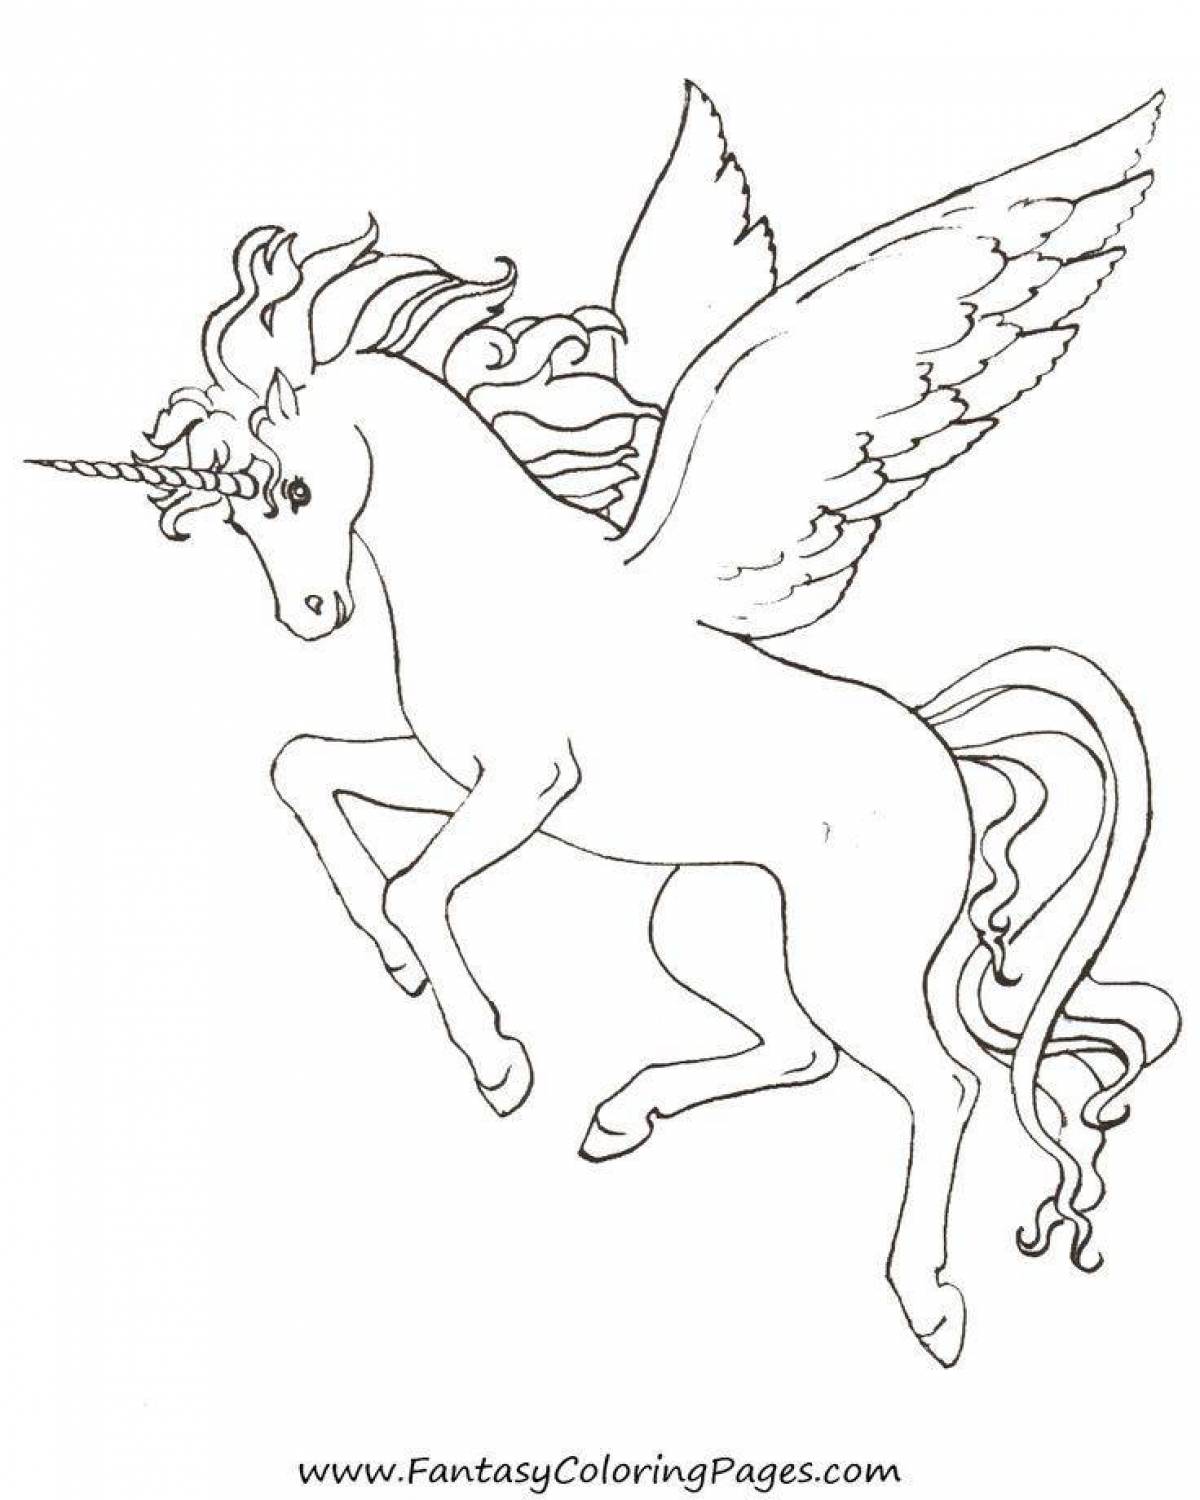 Shiny coloring unicorn with wings